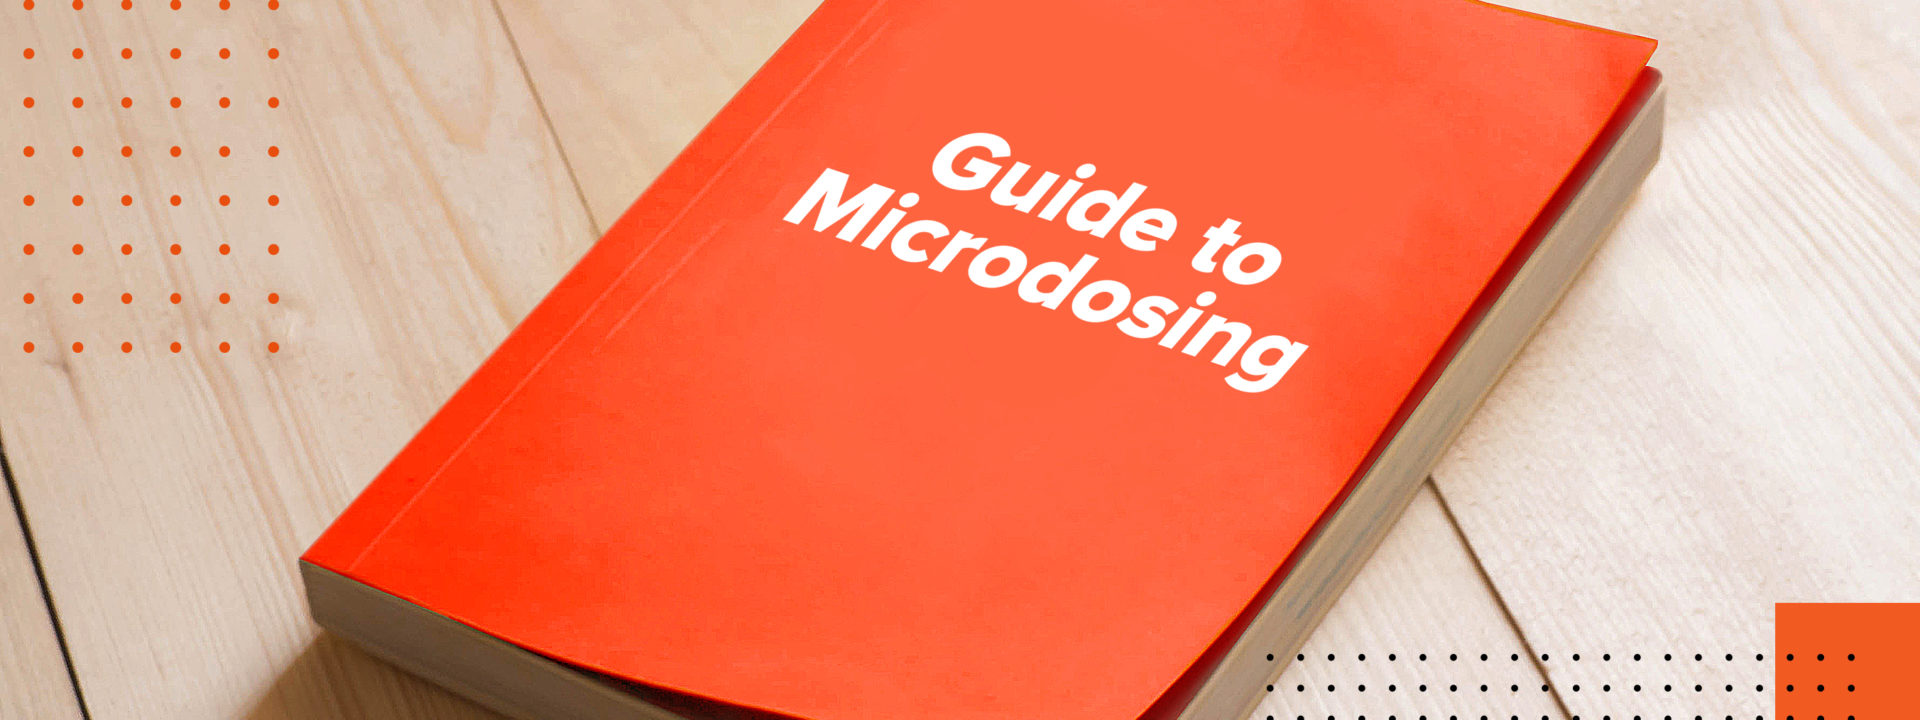 how to microdose